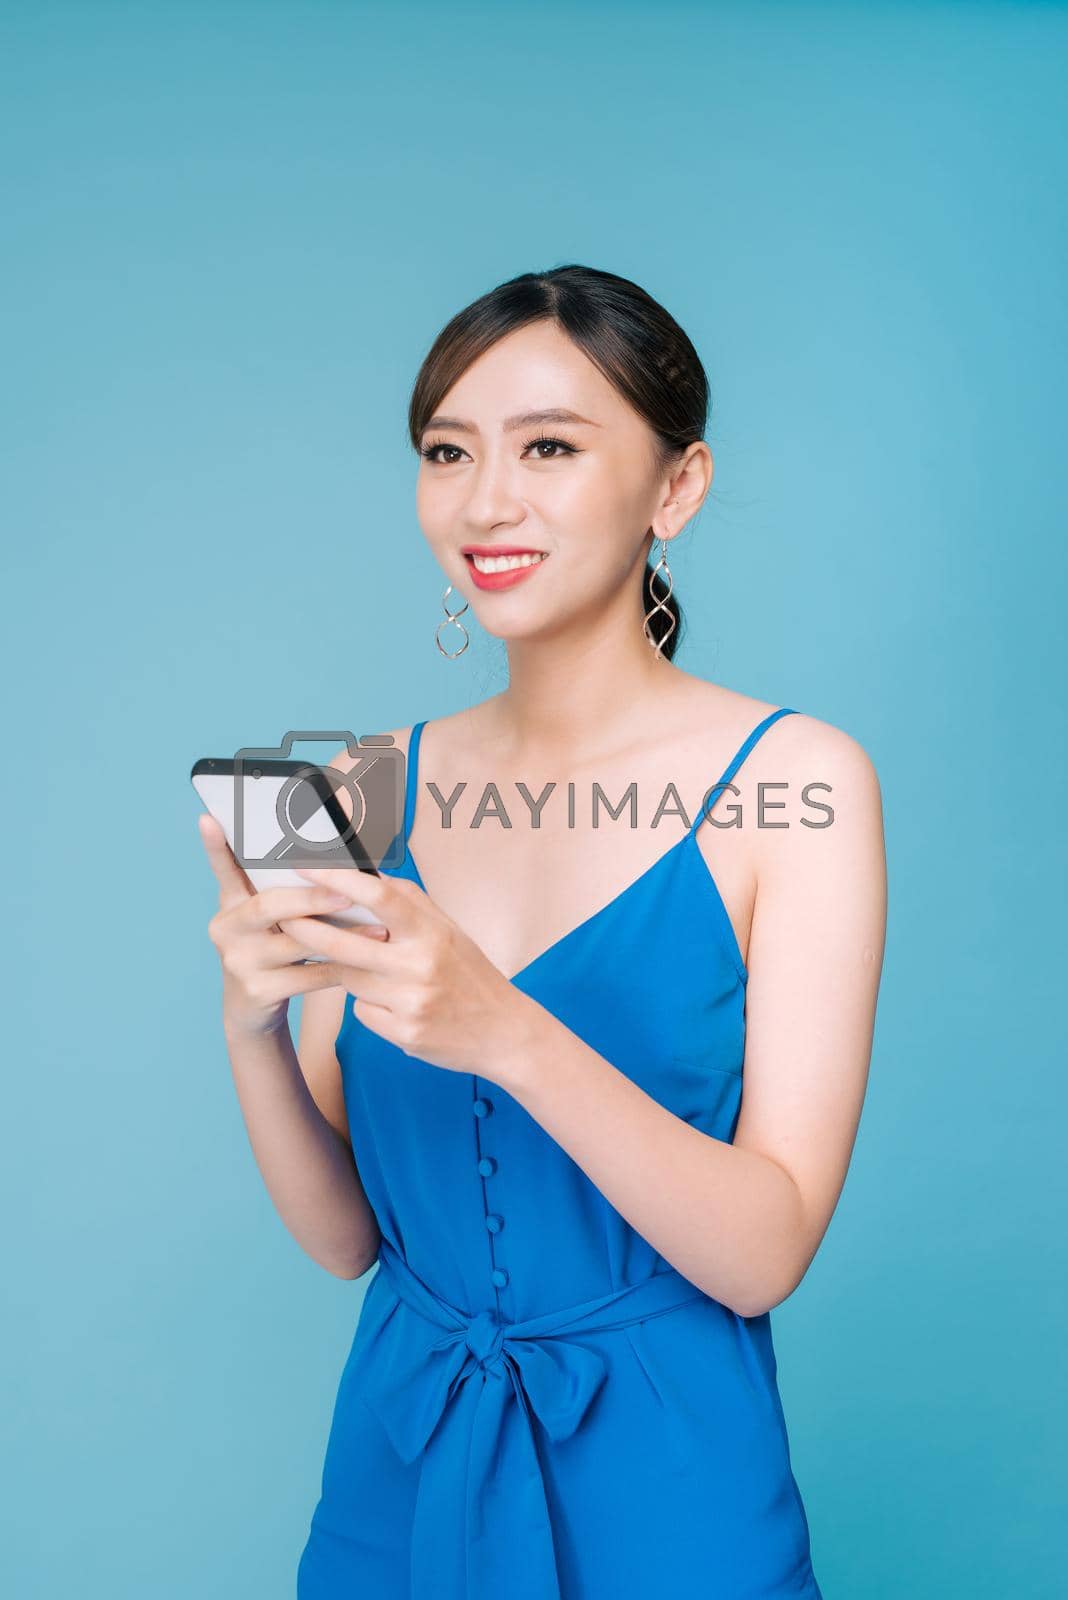 Royalty free image of Attractive woman using text messaging feature on her portable device in studio by makidotvn